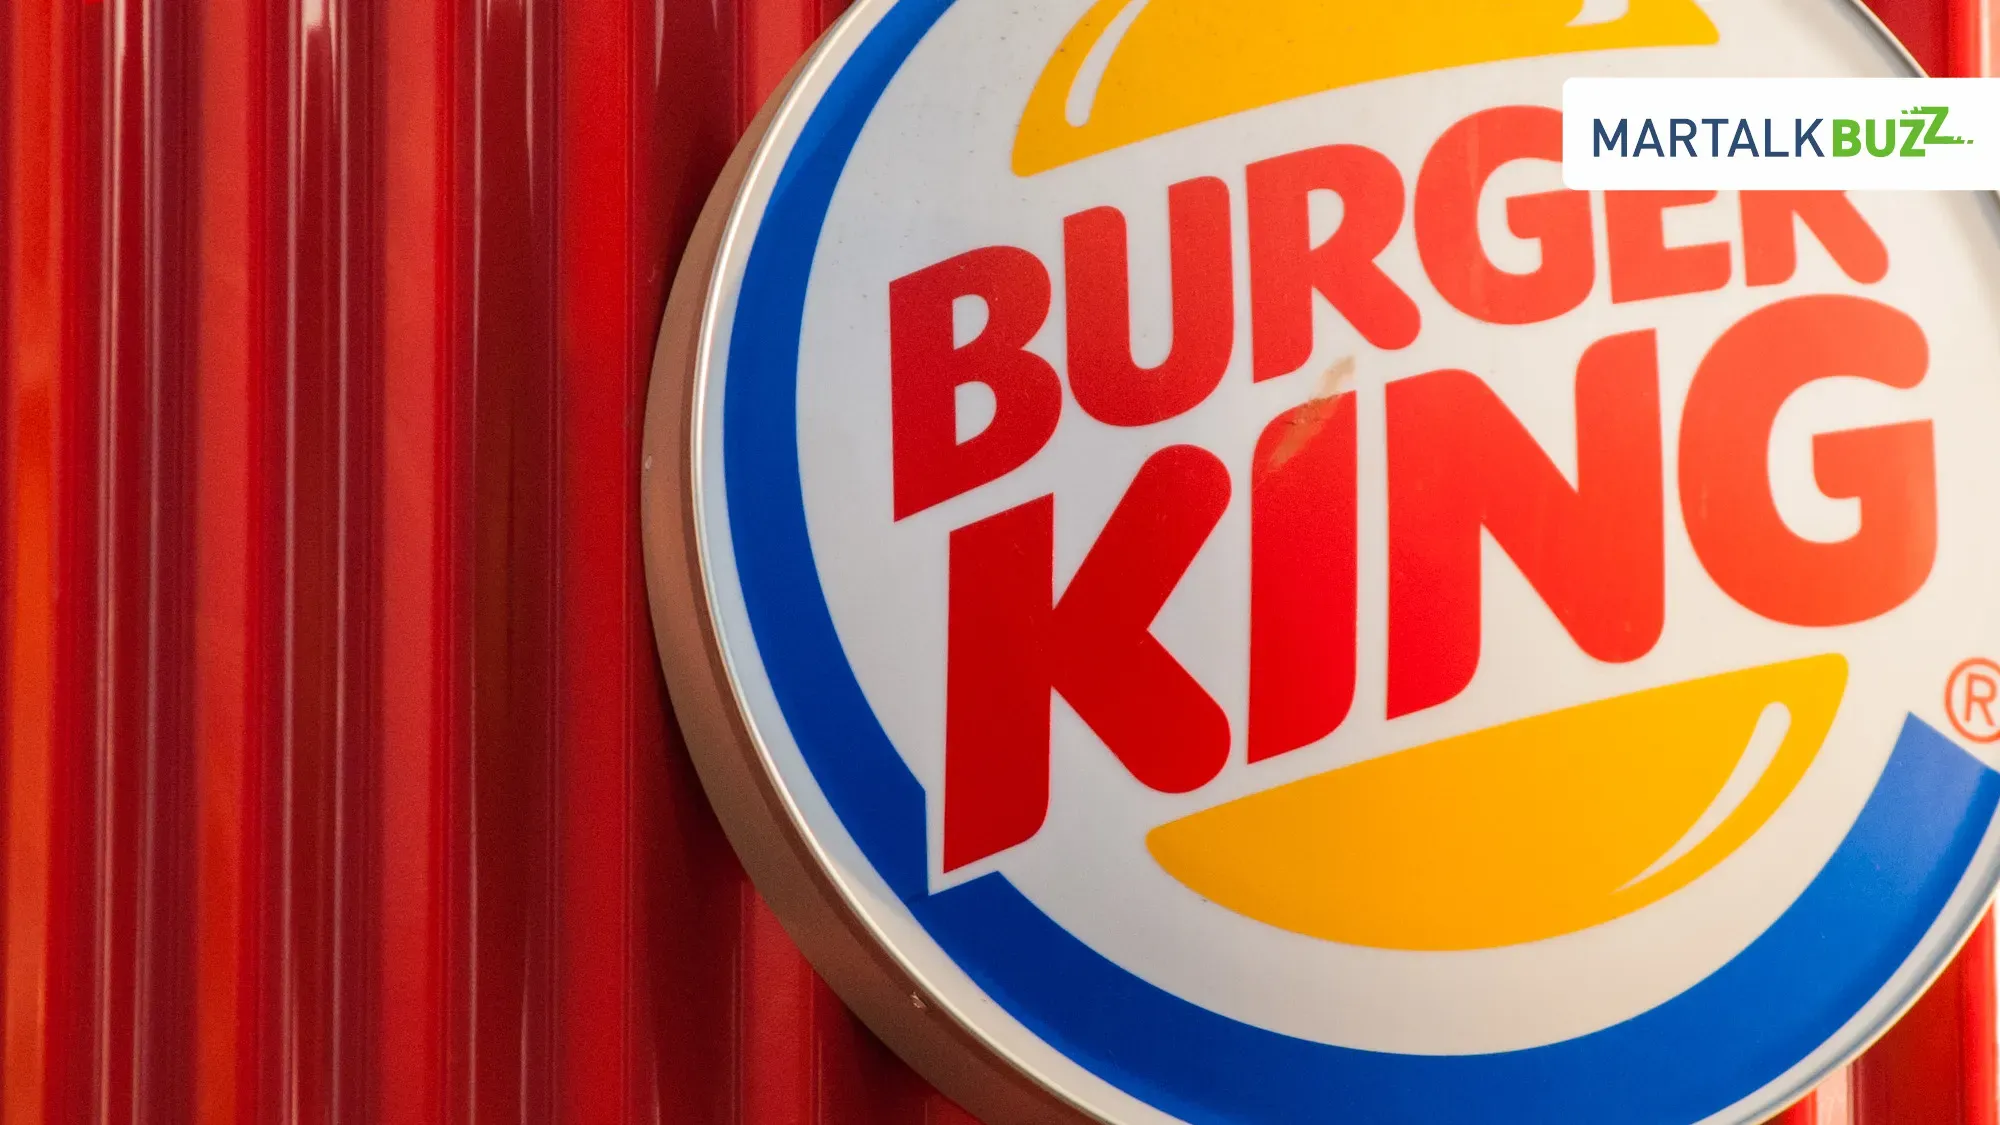 Takeout and Delivery Technology Is the Winning Whopper for This Fast-Food Chain: Q&A With Burger King